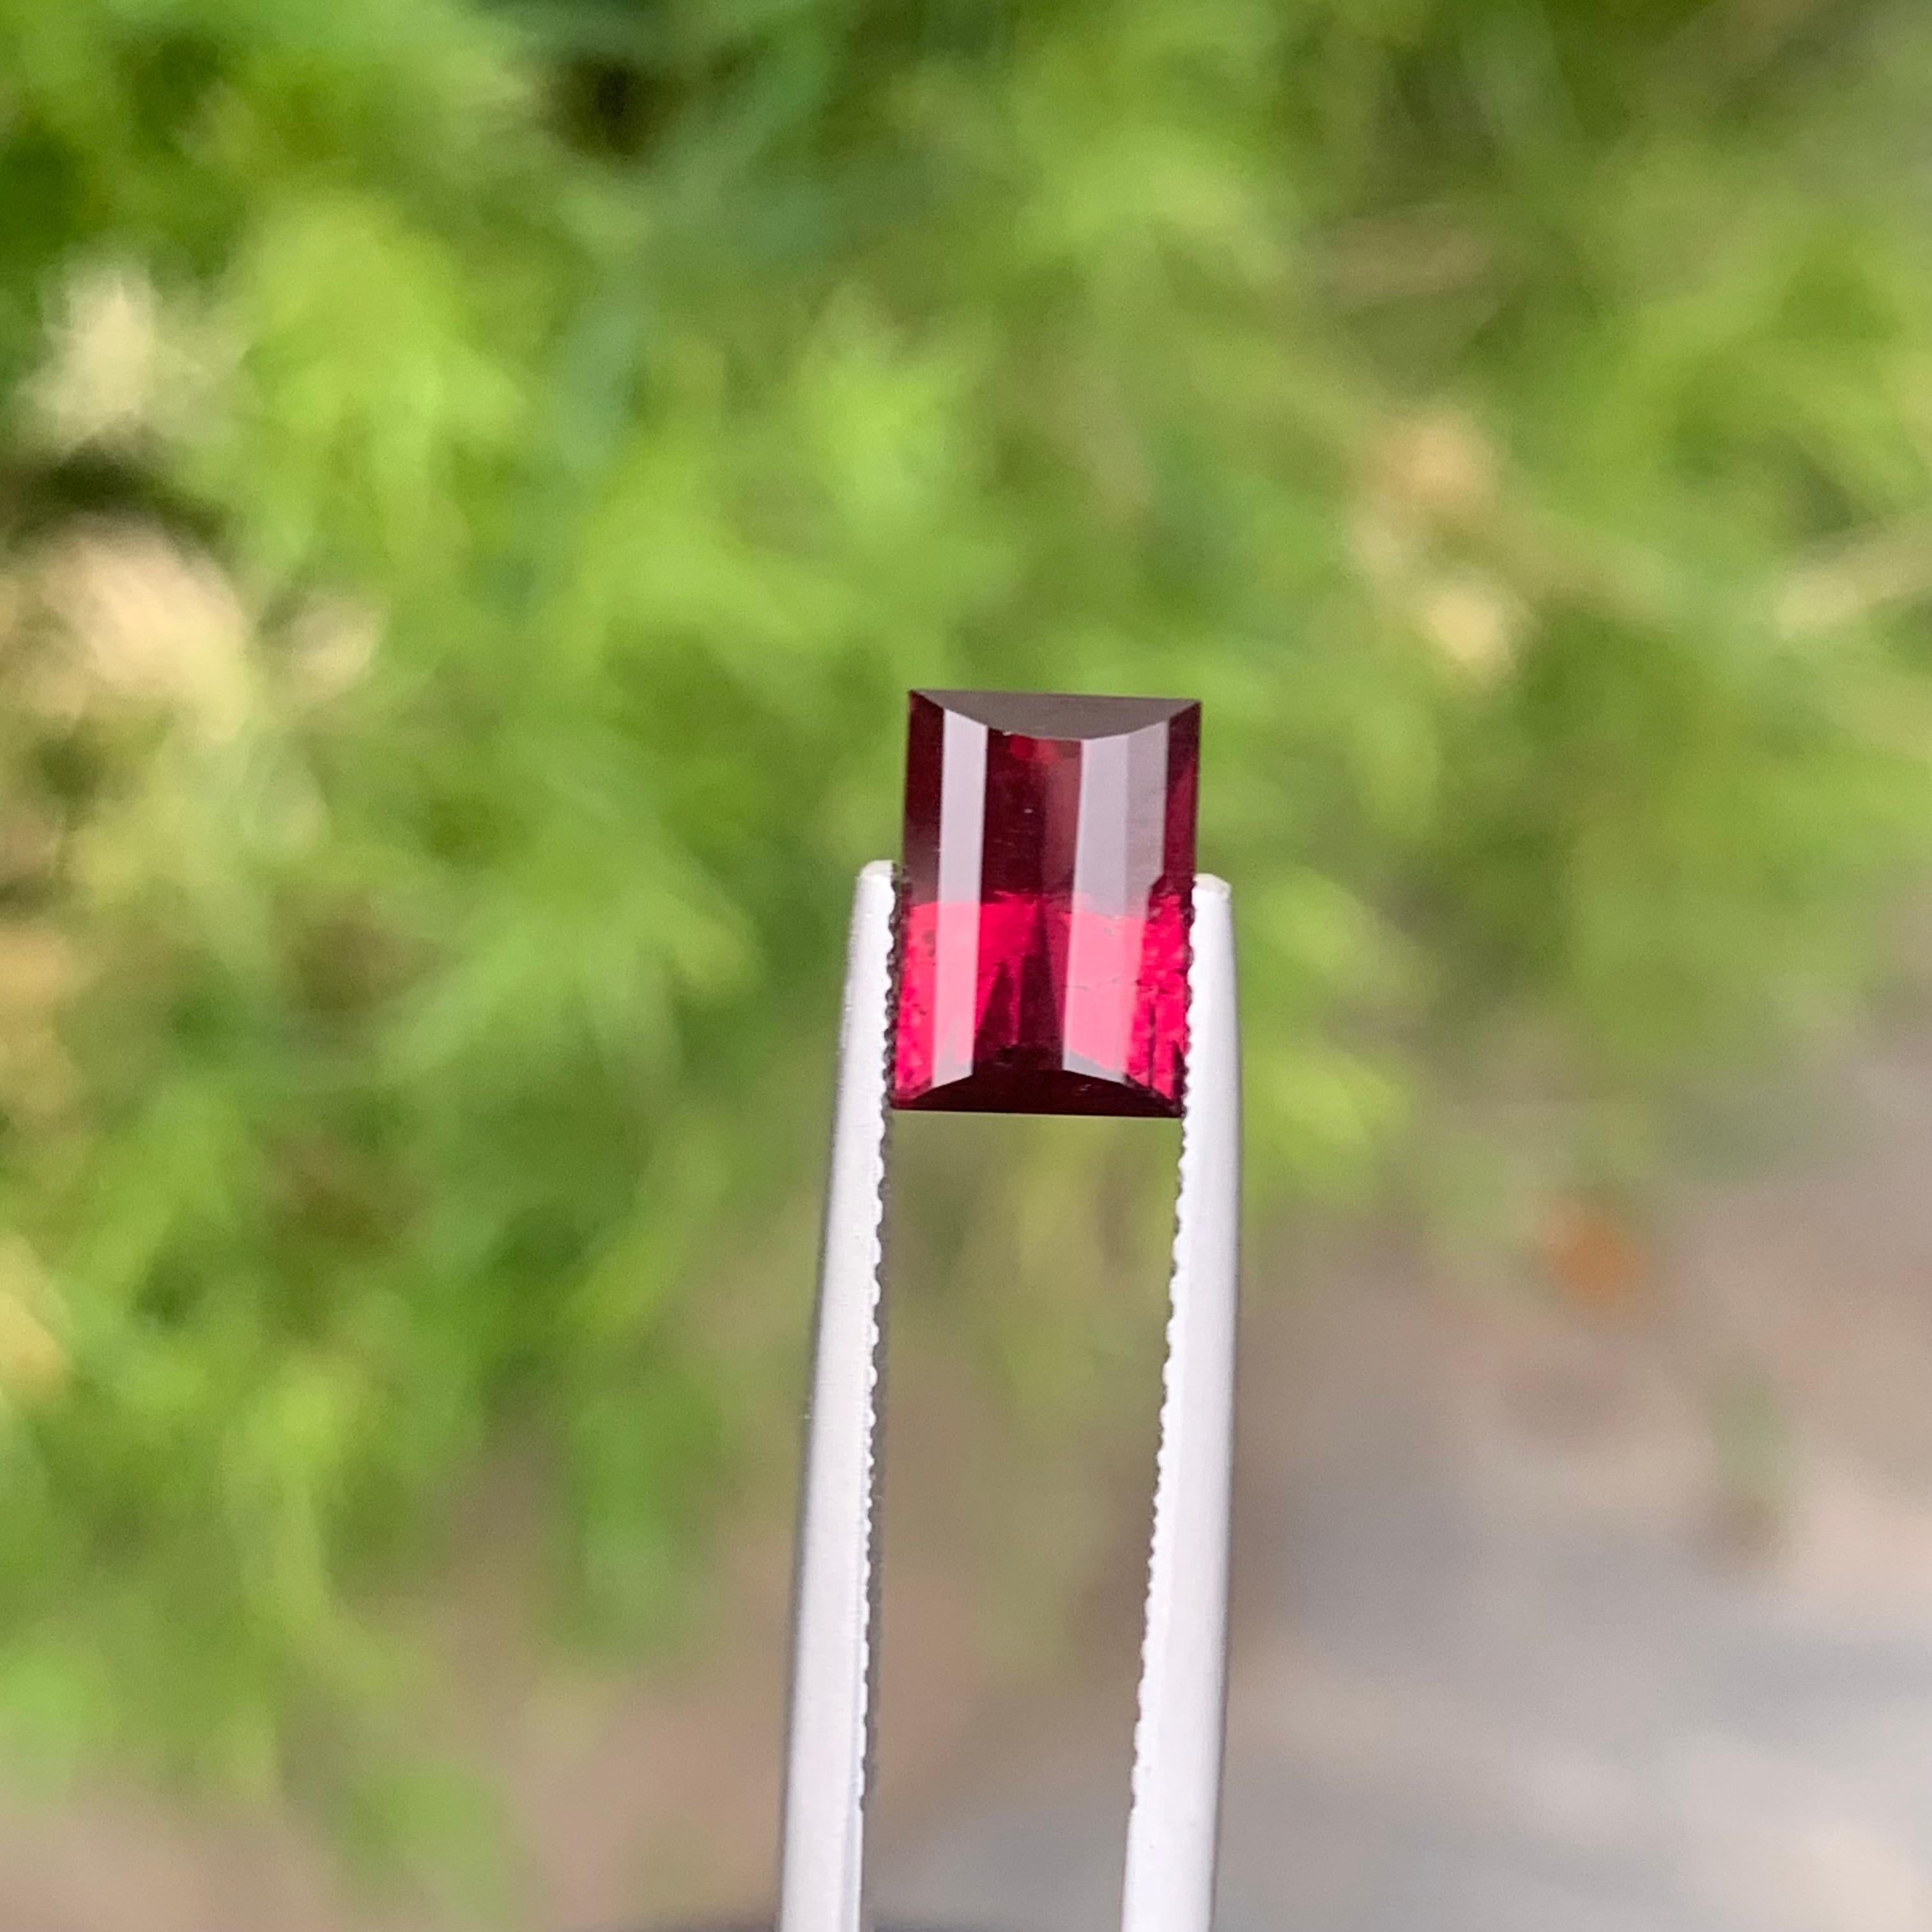 Faceted Rhodolite Garnet
Weight: 2.75 Carats Both
Dimension: 8.8x6.1x4.7 Mm
Origin: Madagascar Africa
Color: Red
Treatment: Non
Shape: Baguette
Cut: Fancy
The Rhodolite resembles pomegranate seeds, since both are eternal both are love symbols. This